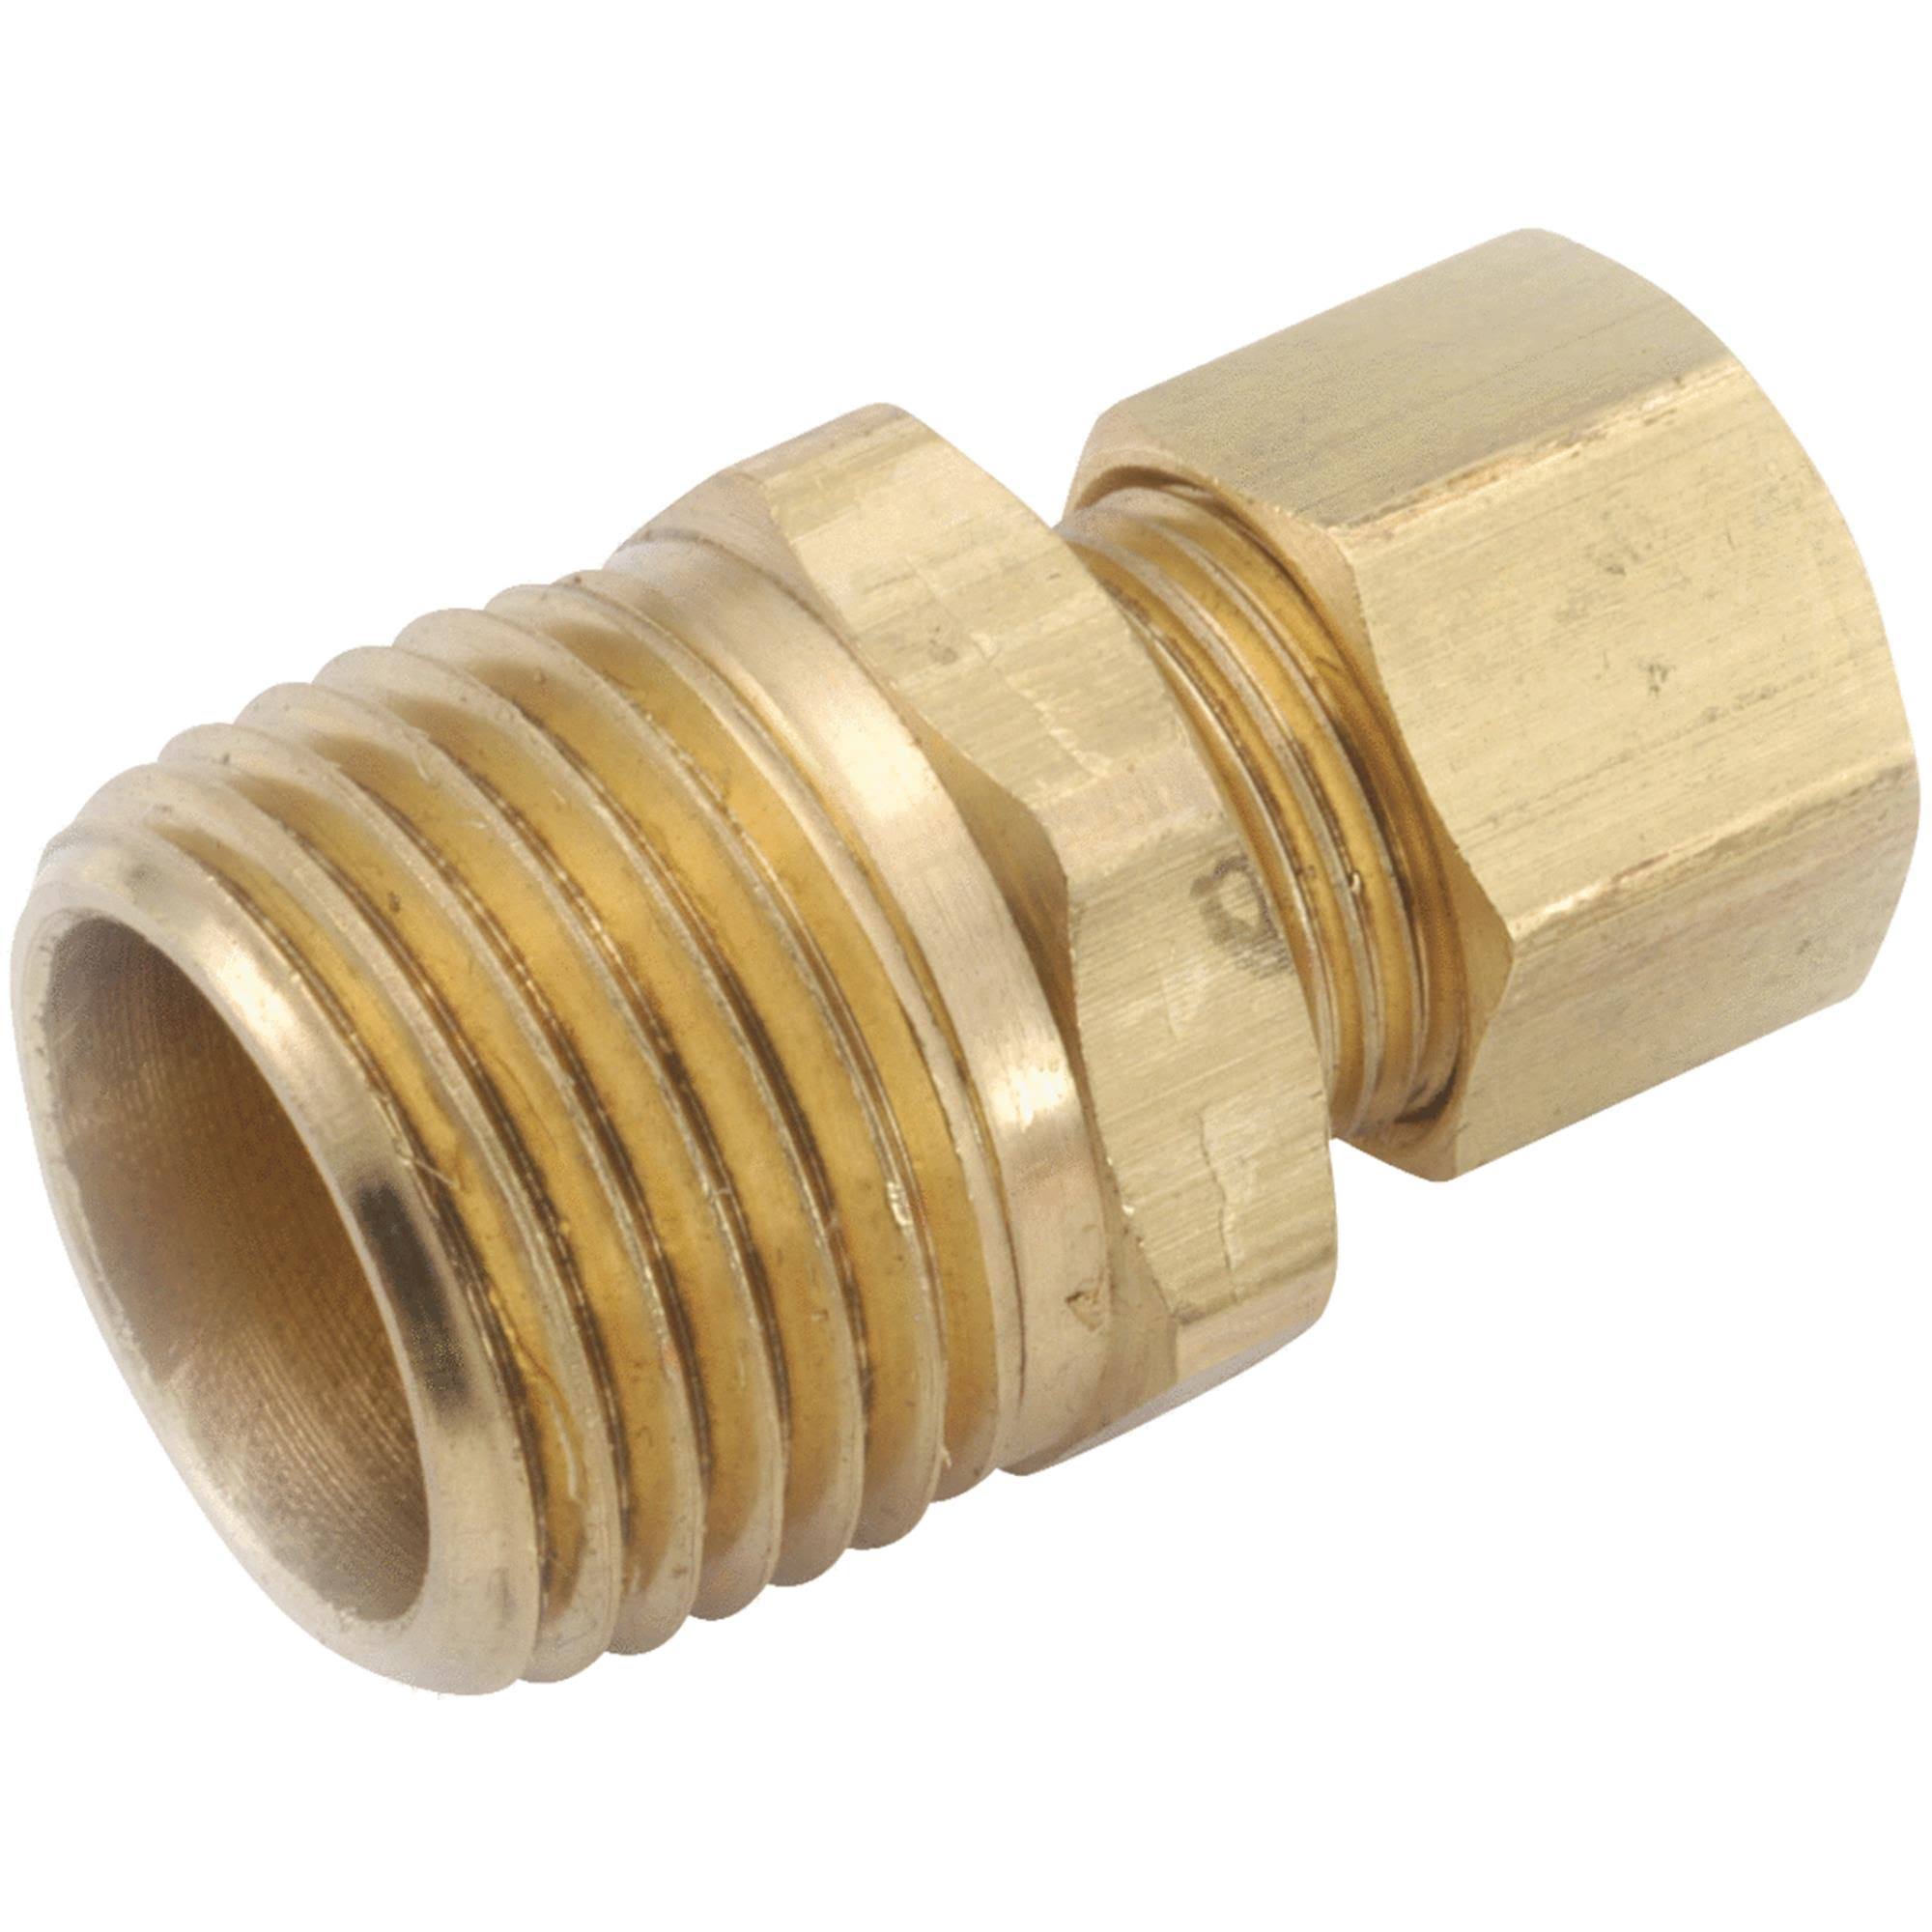 Anderson Metals Compression Coupling - 10 Pack